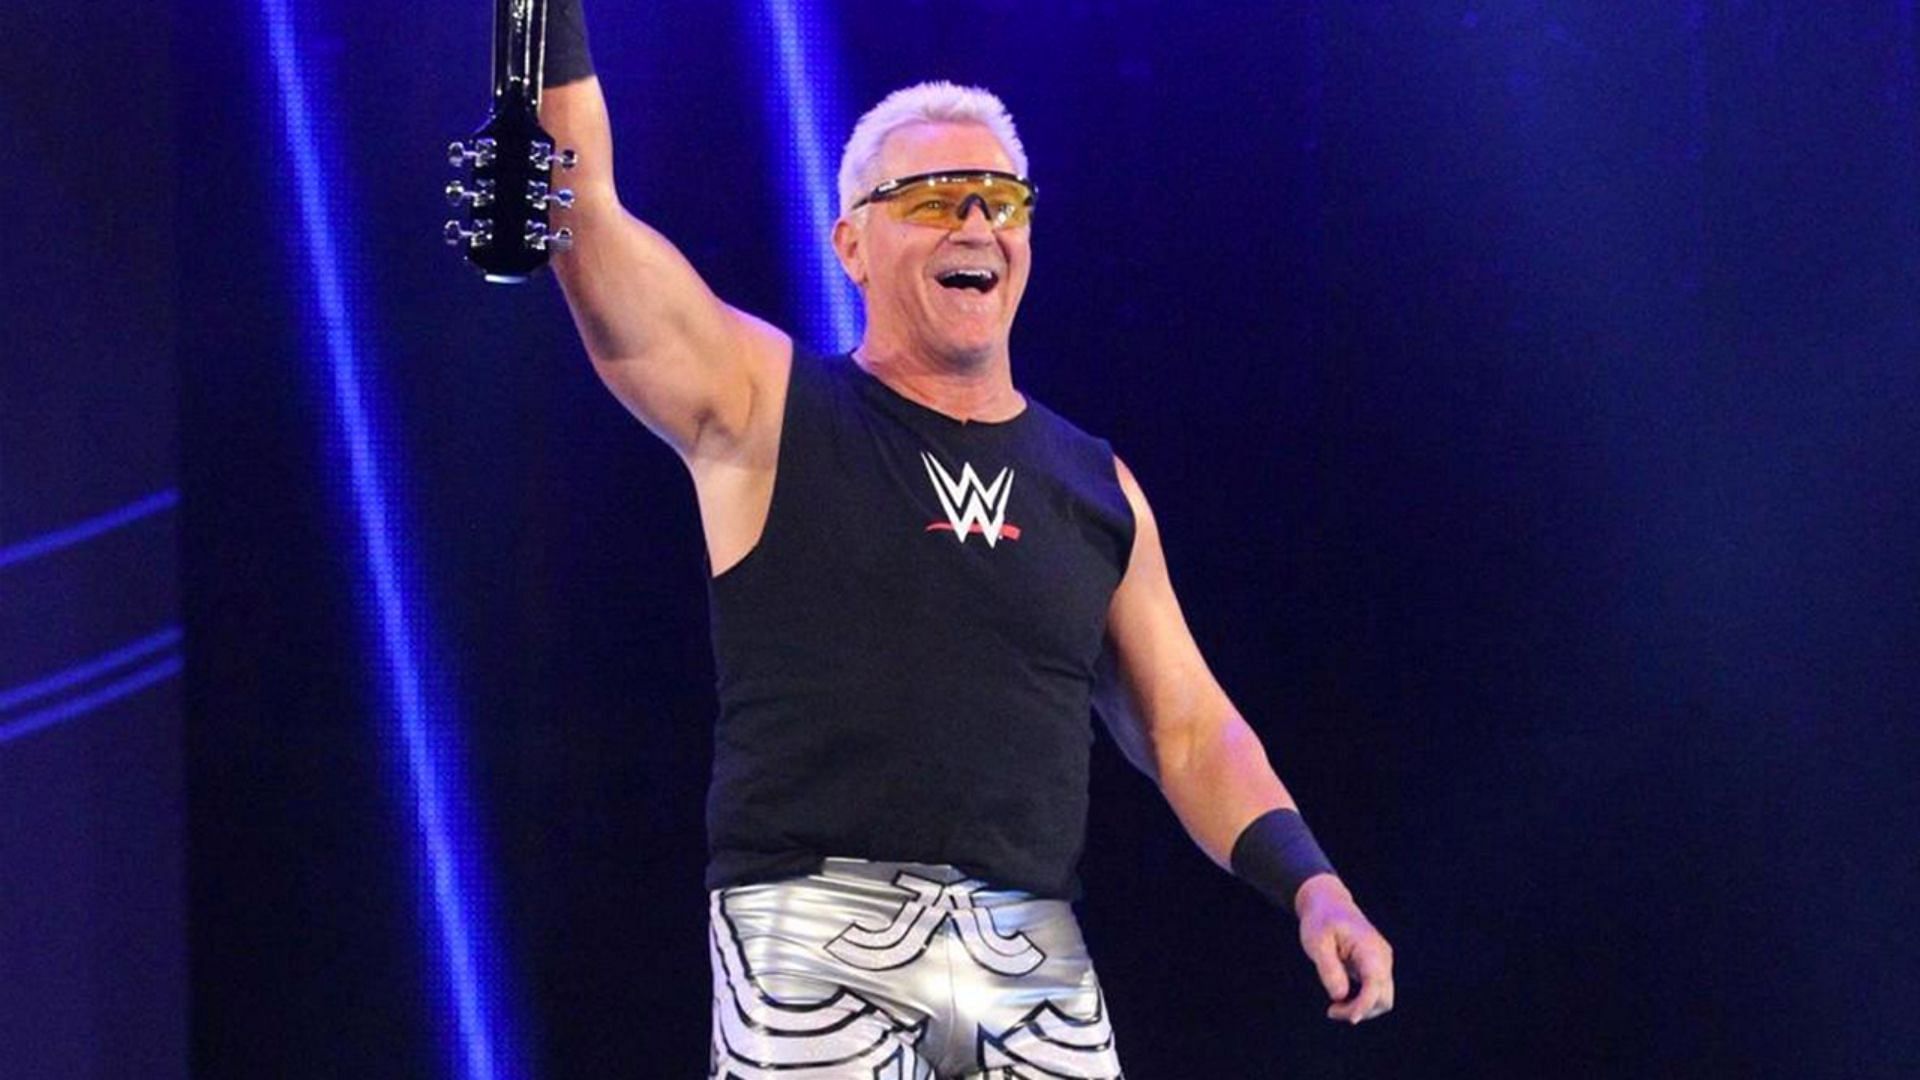 Jeff Jarrett has been working in the wrestling business for over 30 years